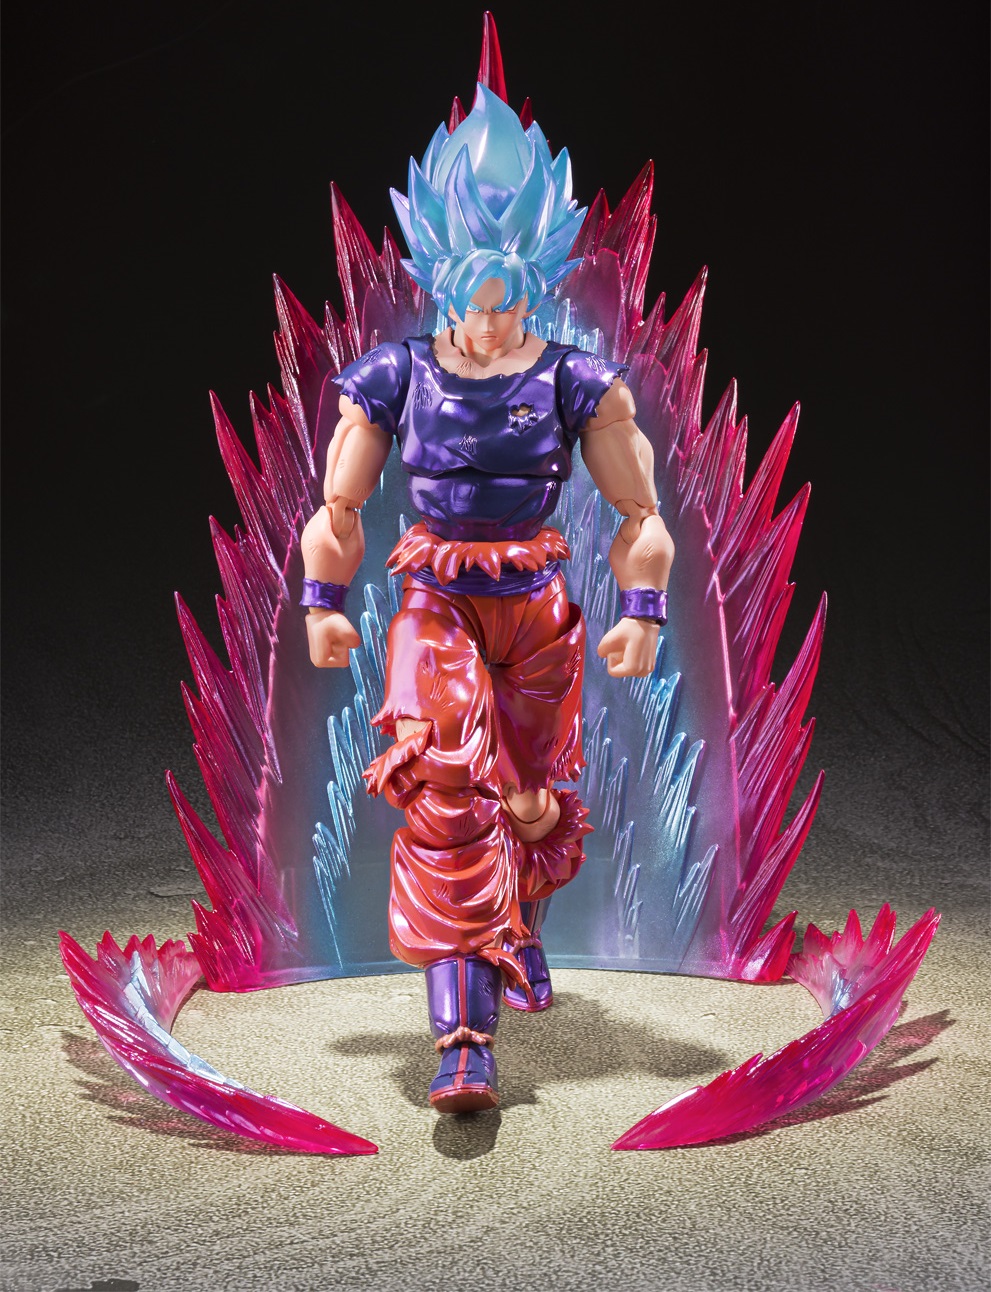 S.H.Figuarts スーパーサイヤ人ゴッドss孫悟空 界王拳ver - コミック